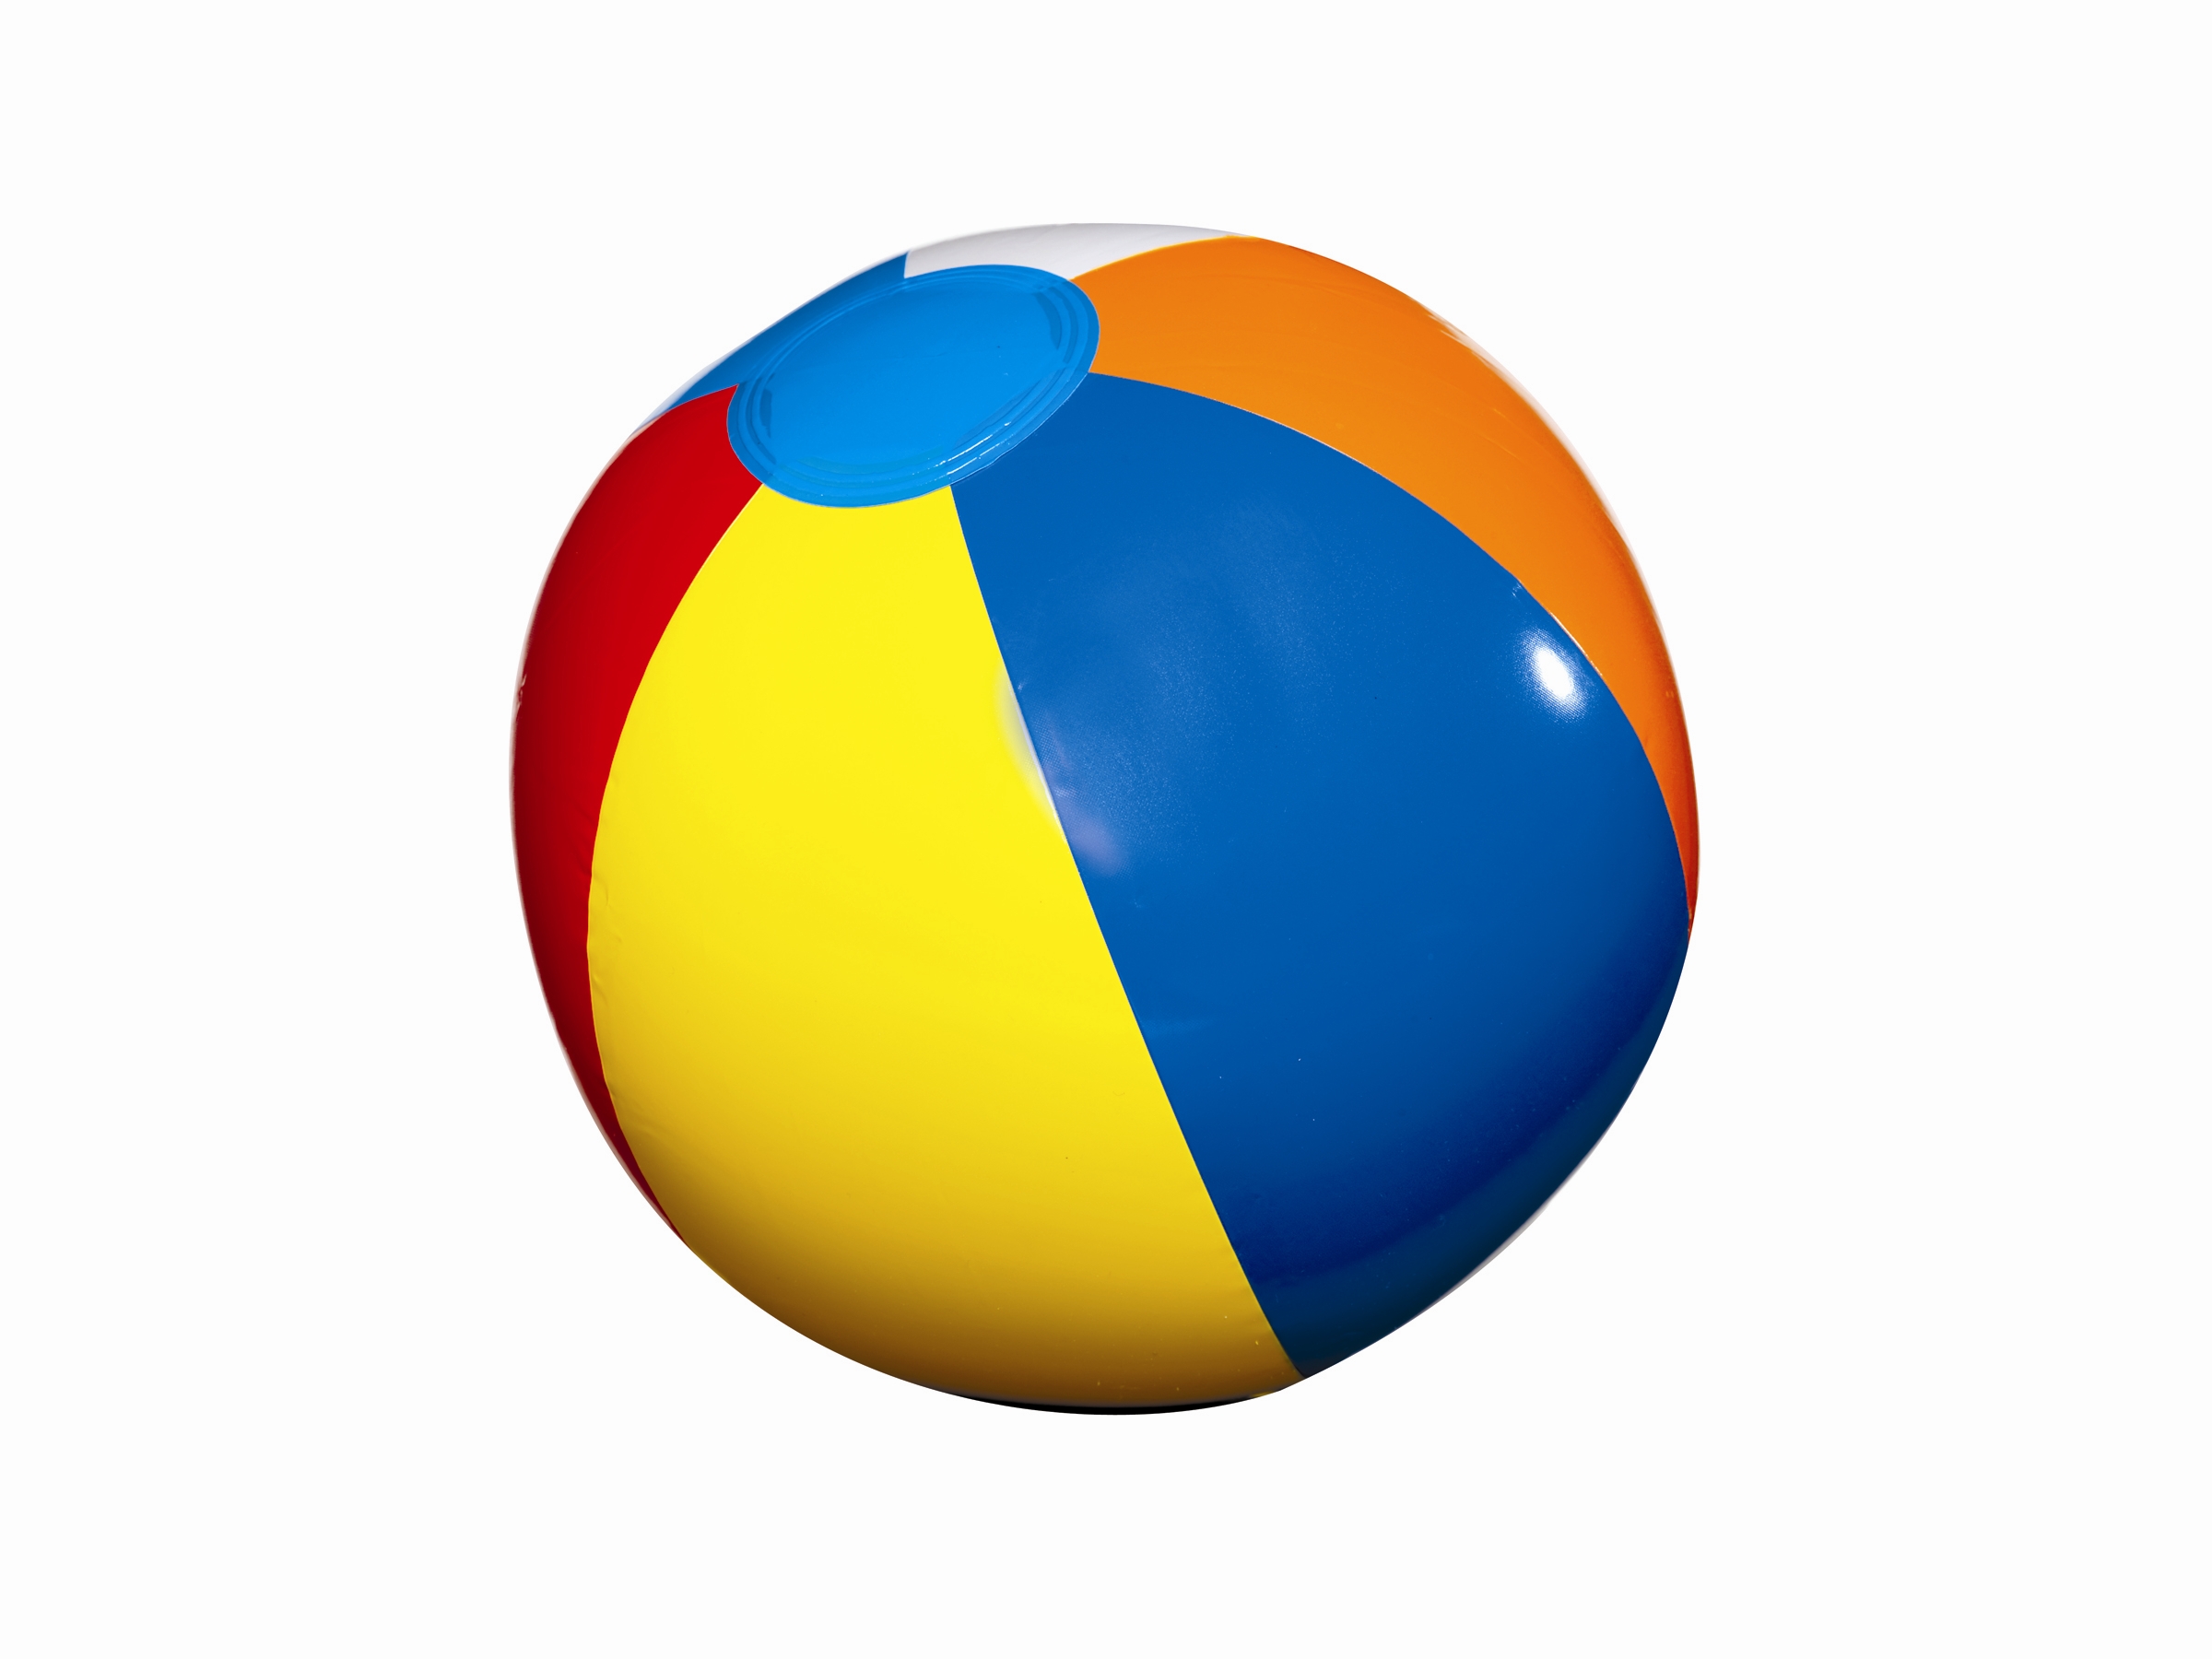 Beach ball clipart free clip art images 2 image 3 3